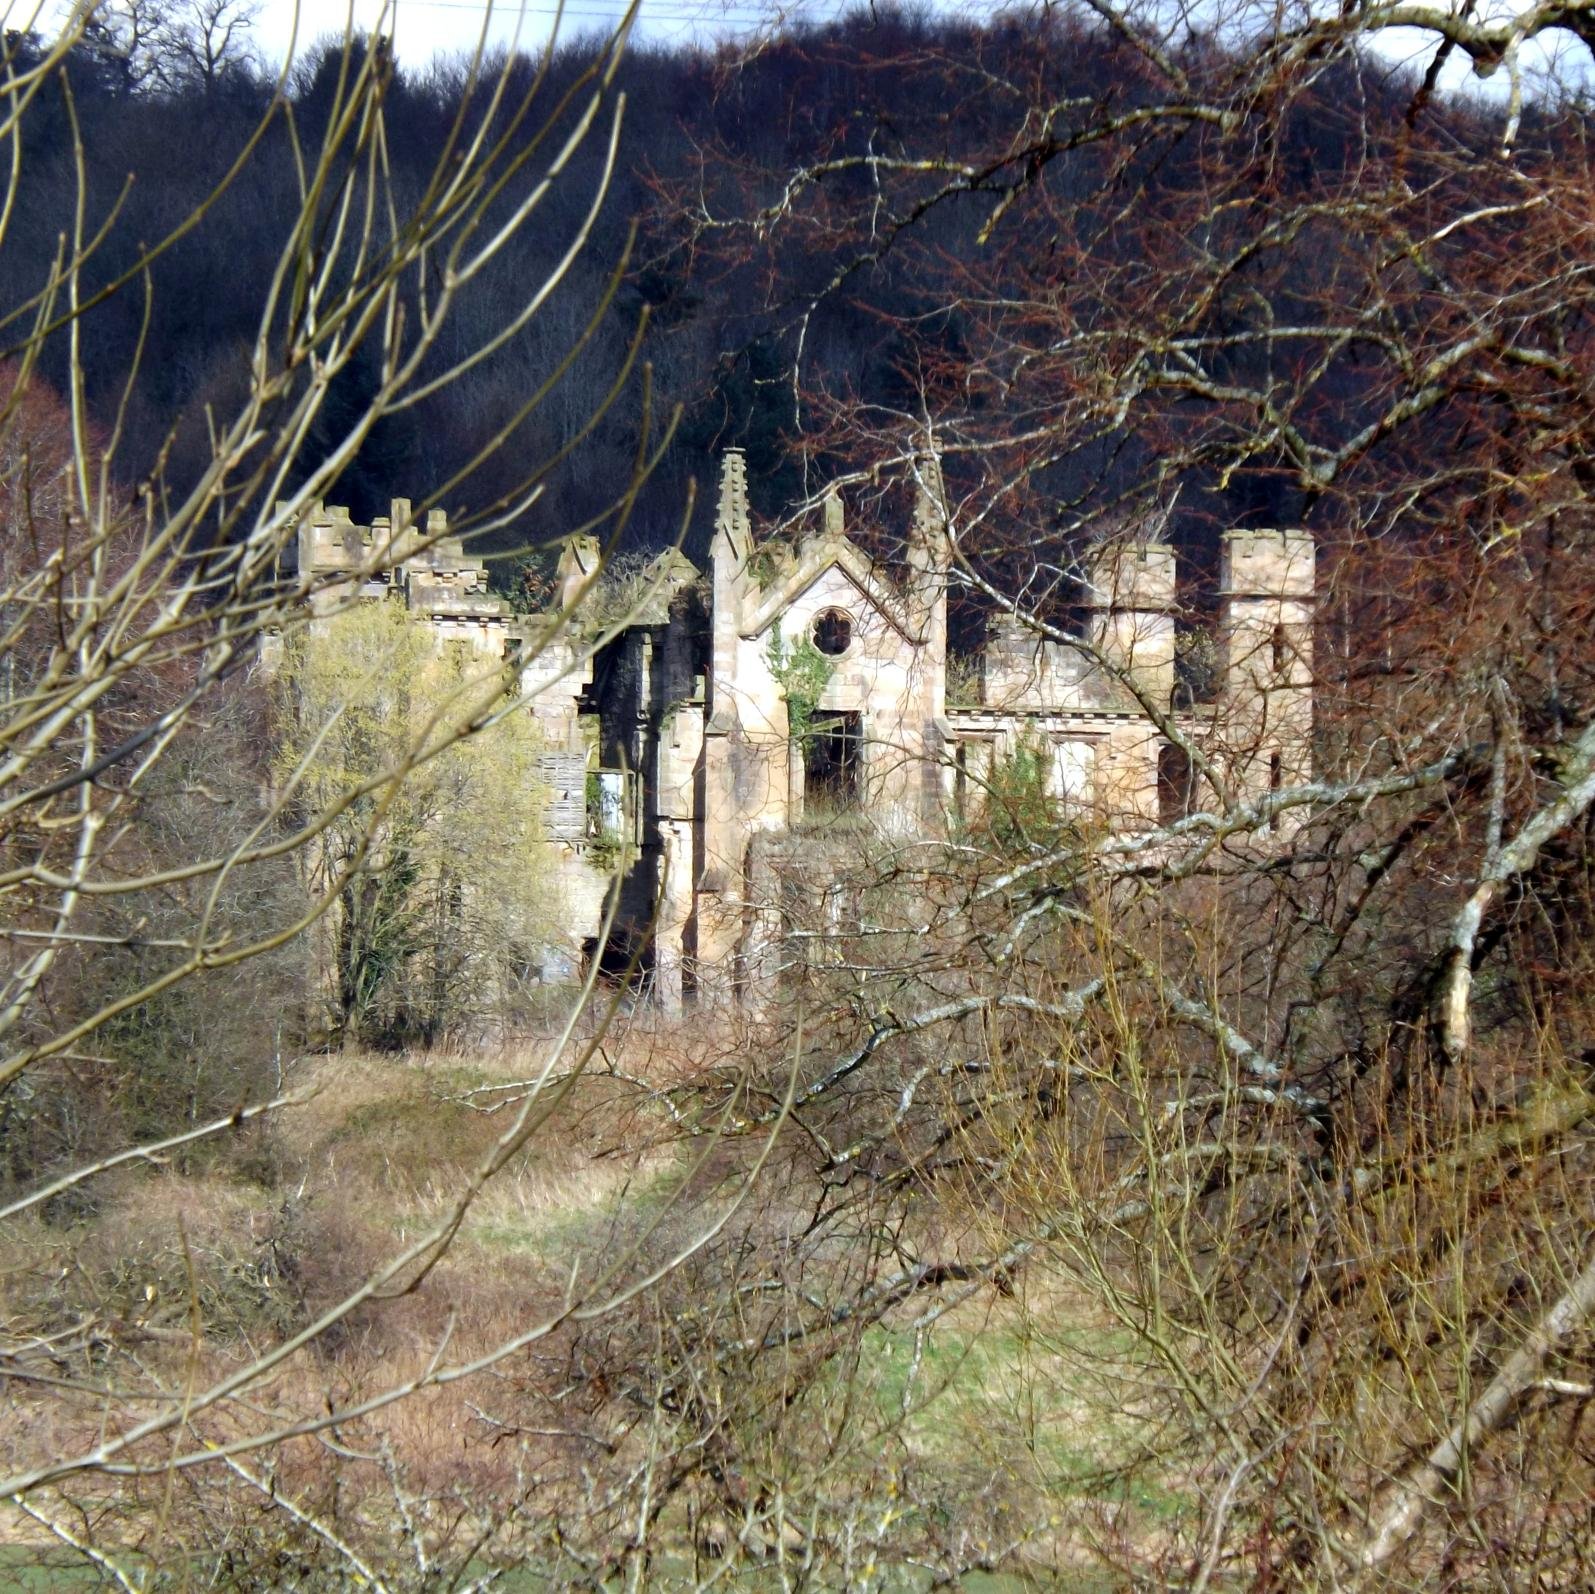 Twitter account for Lost Houses of the Clyde Valley, see also @ScottClydeTrail - Celebrate our Lanarkshire Heritage!